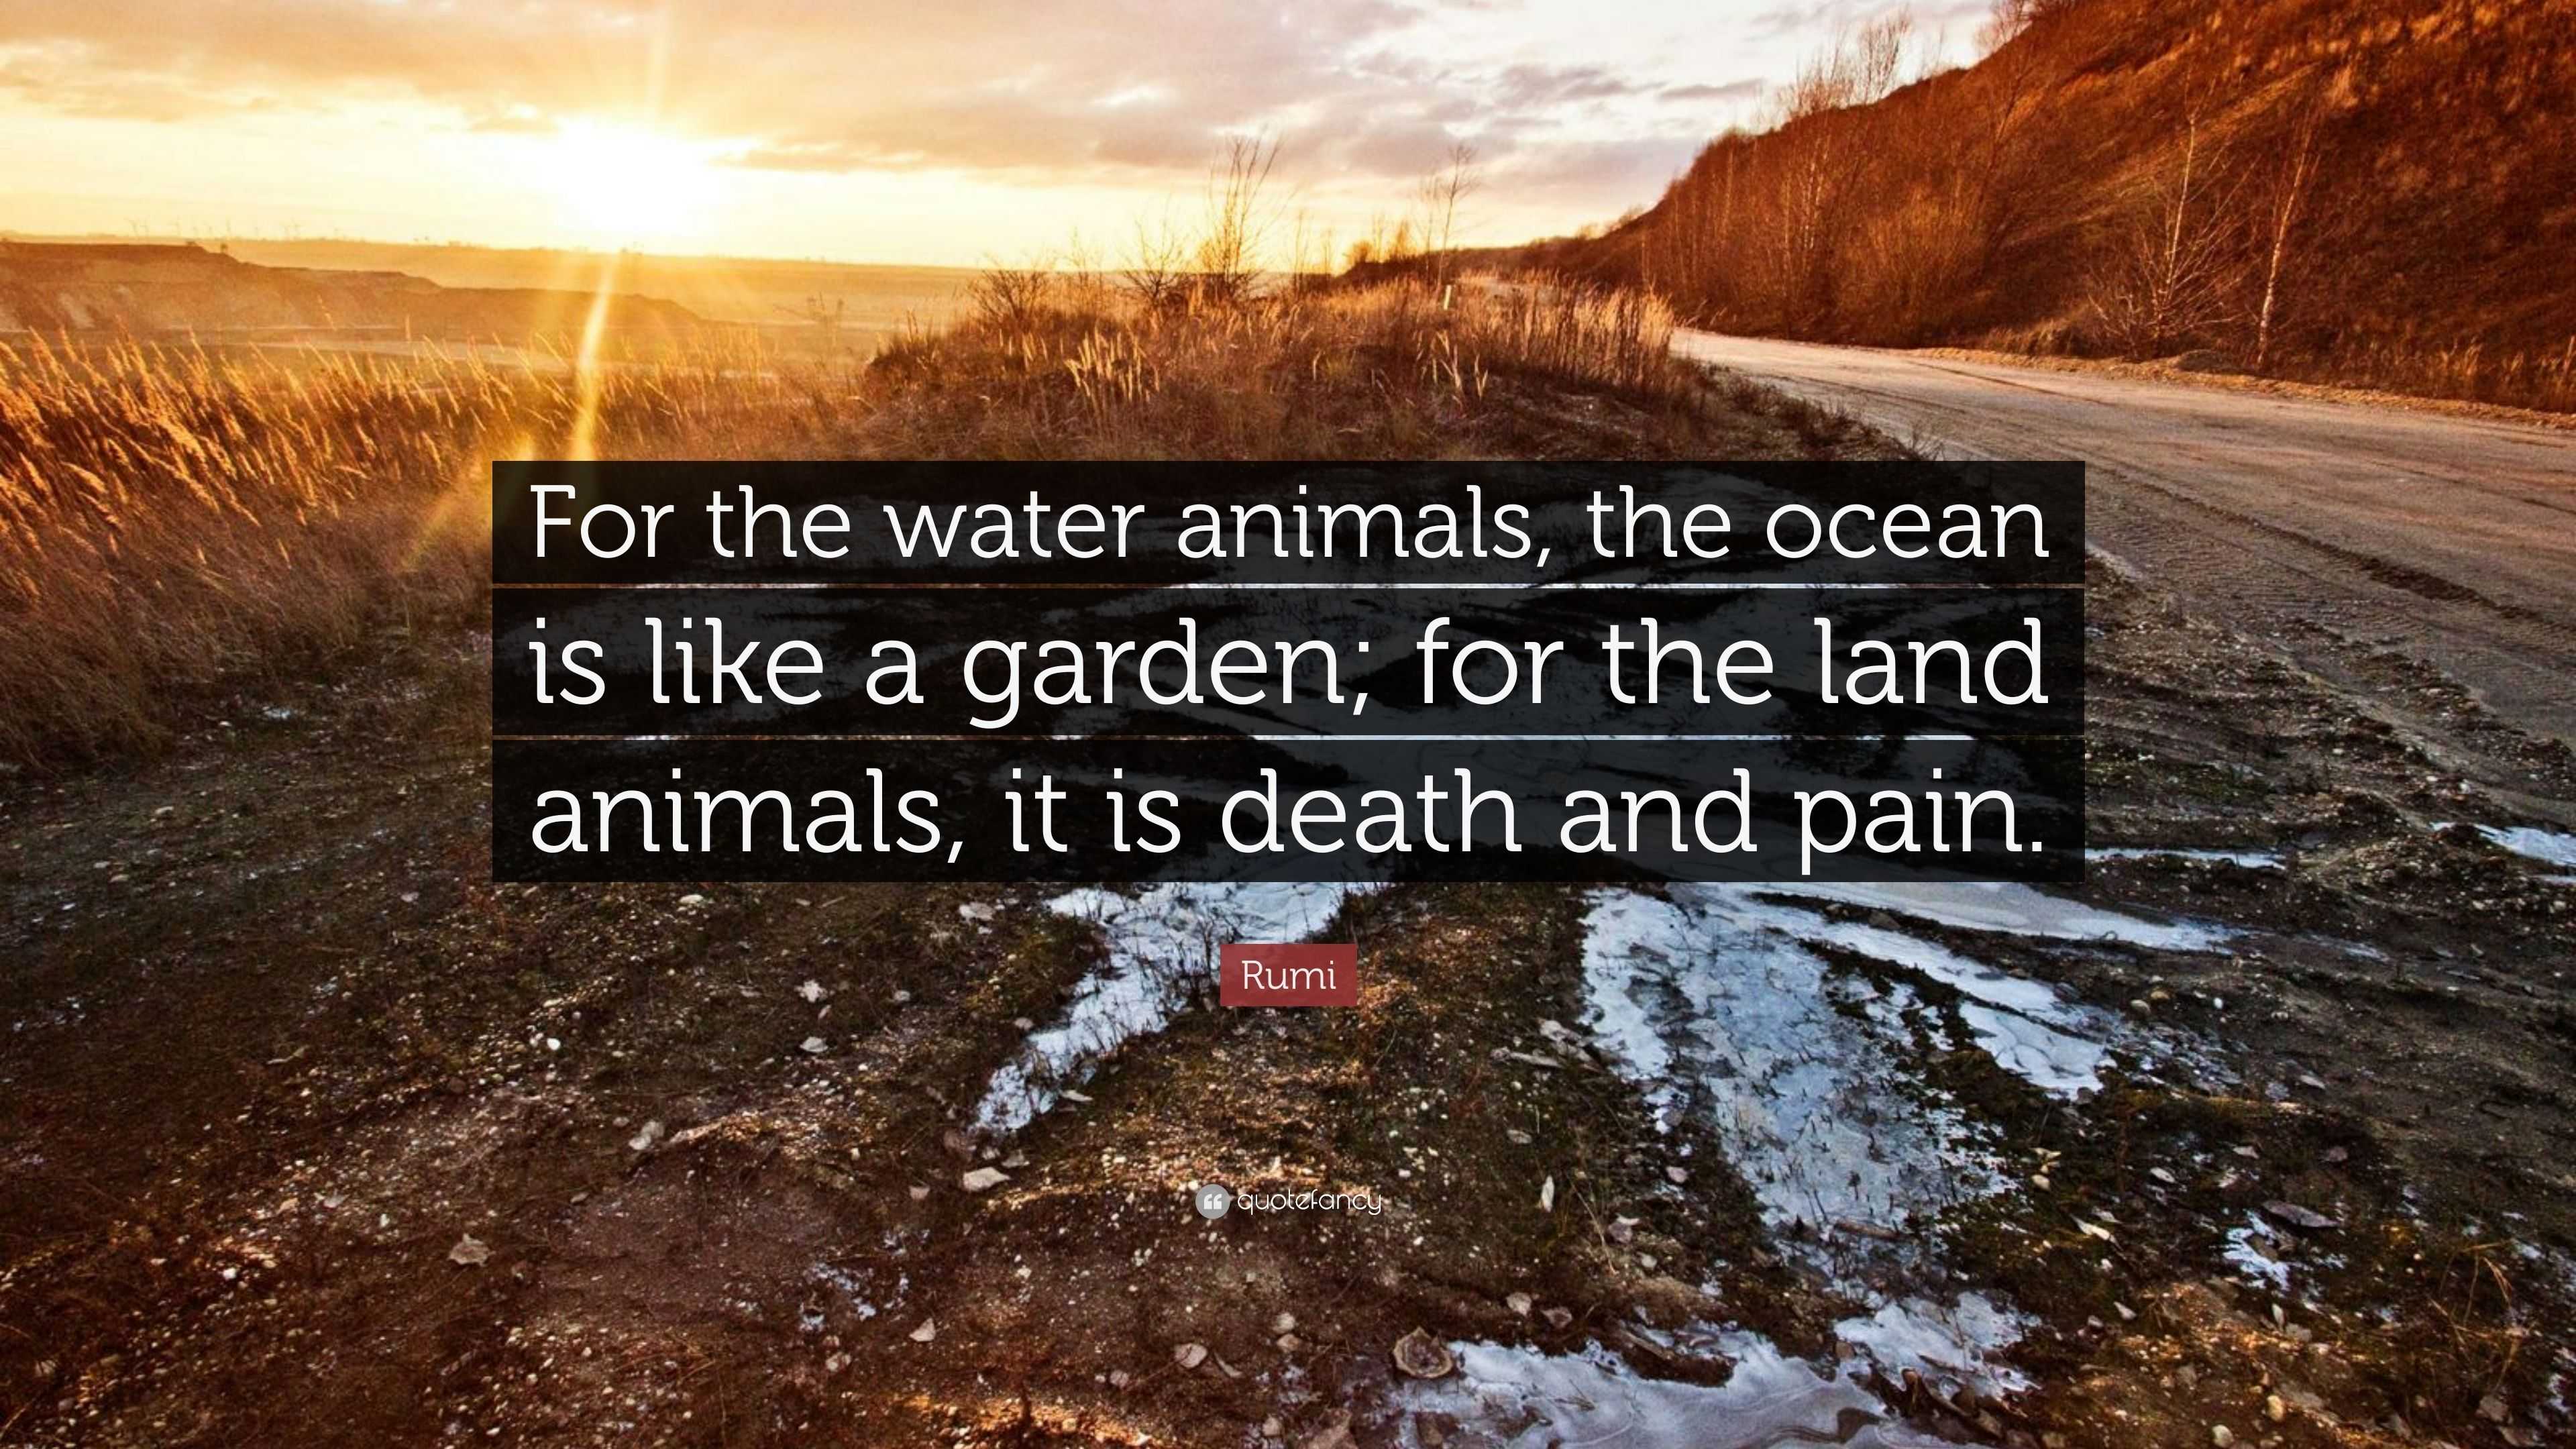 Rumi Quote “For the water animals the ocean is like a garden